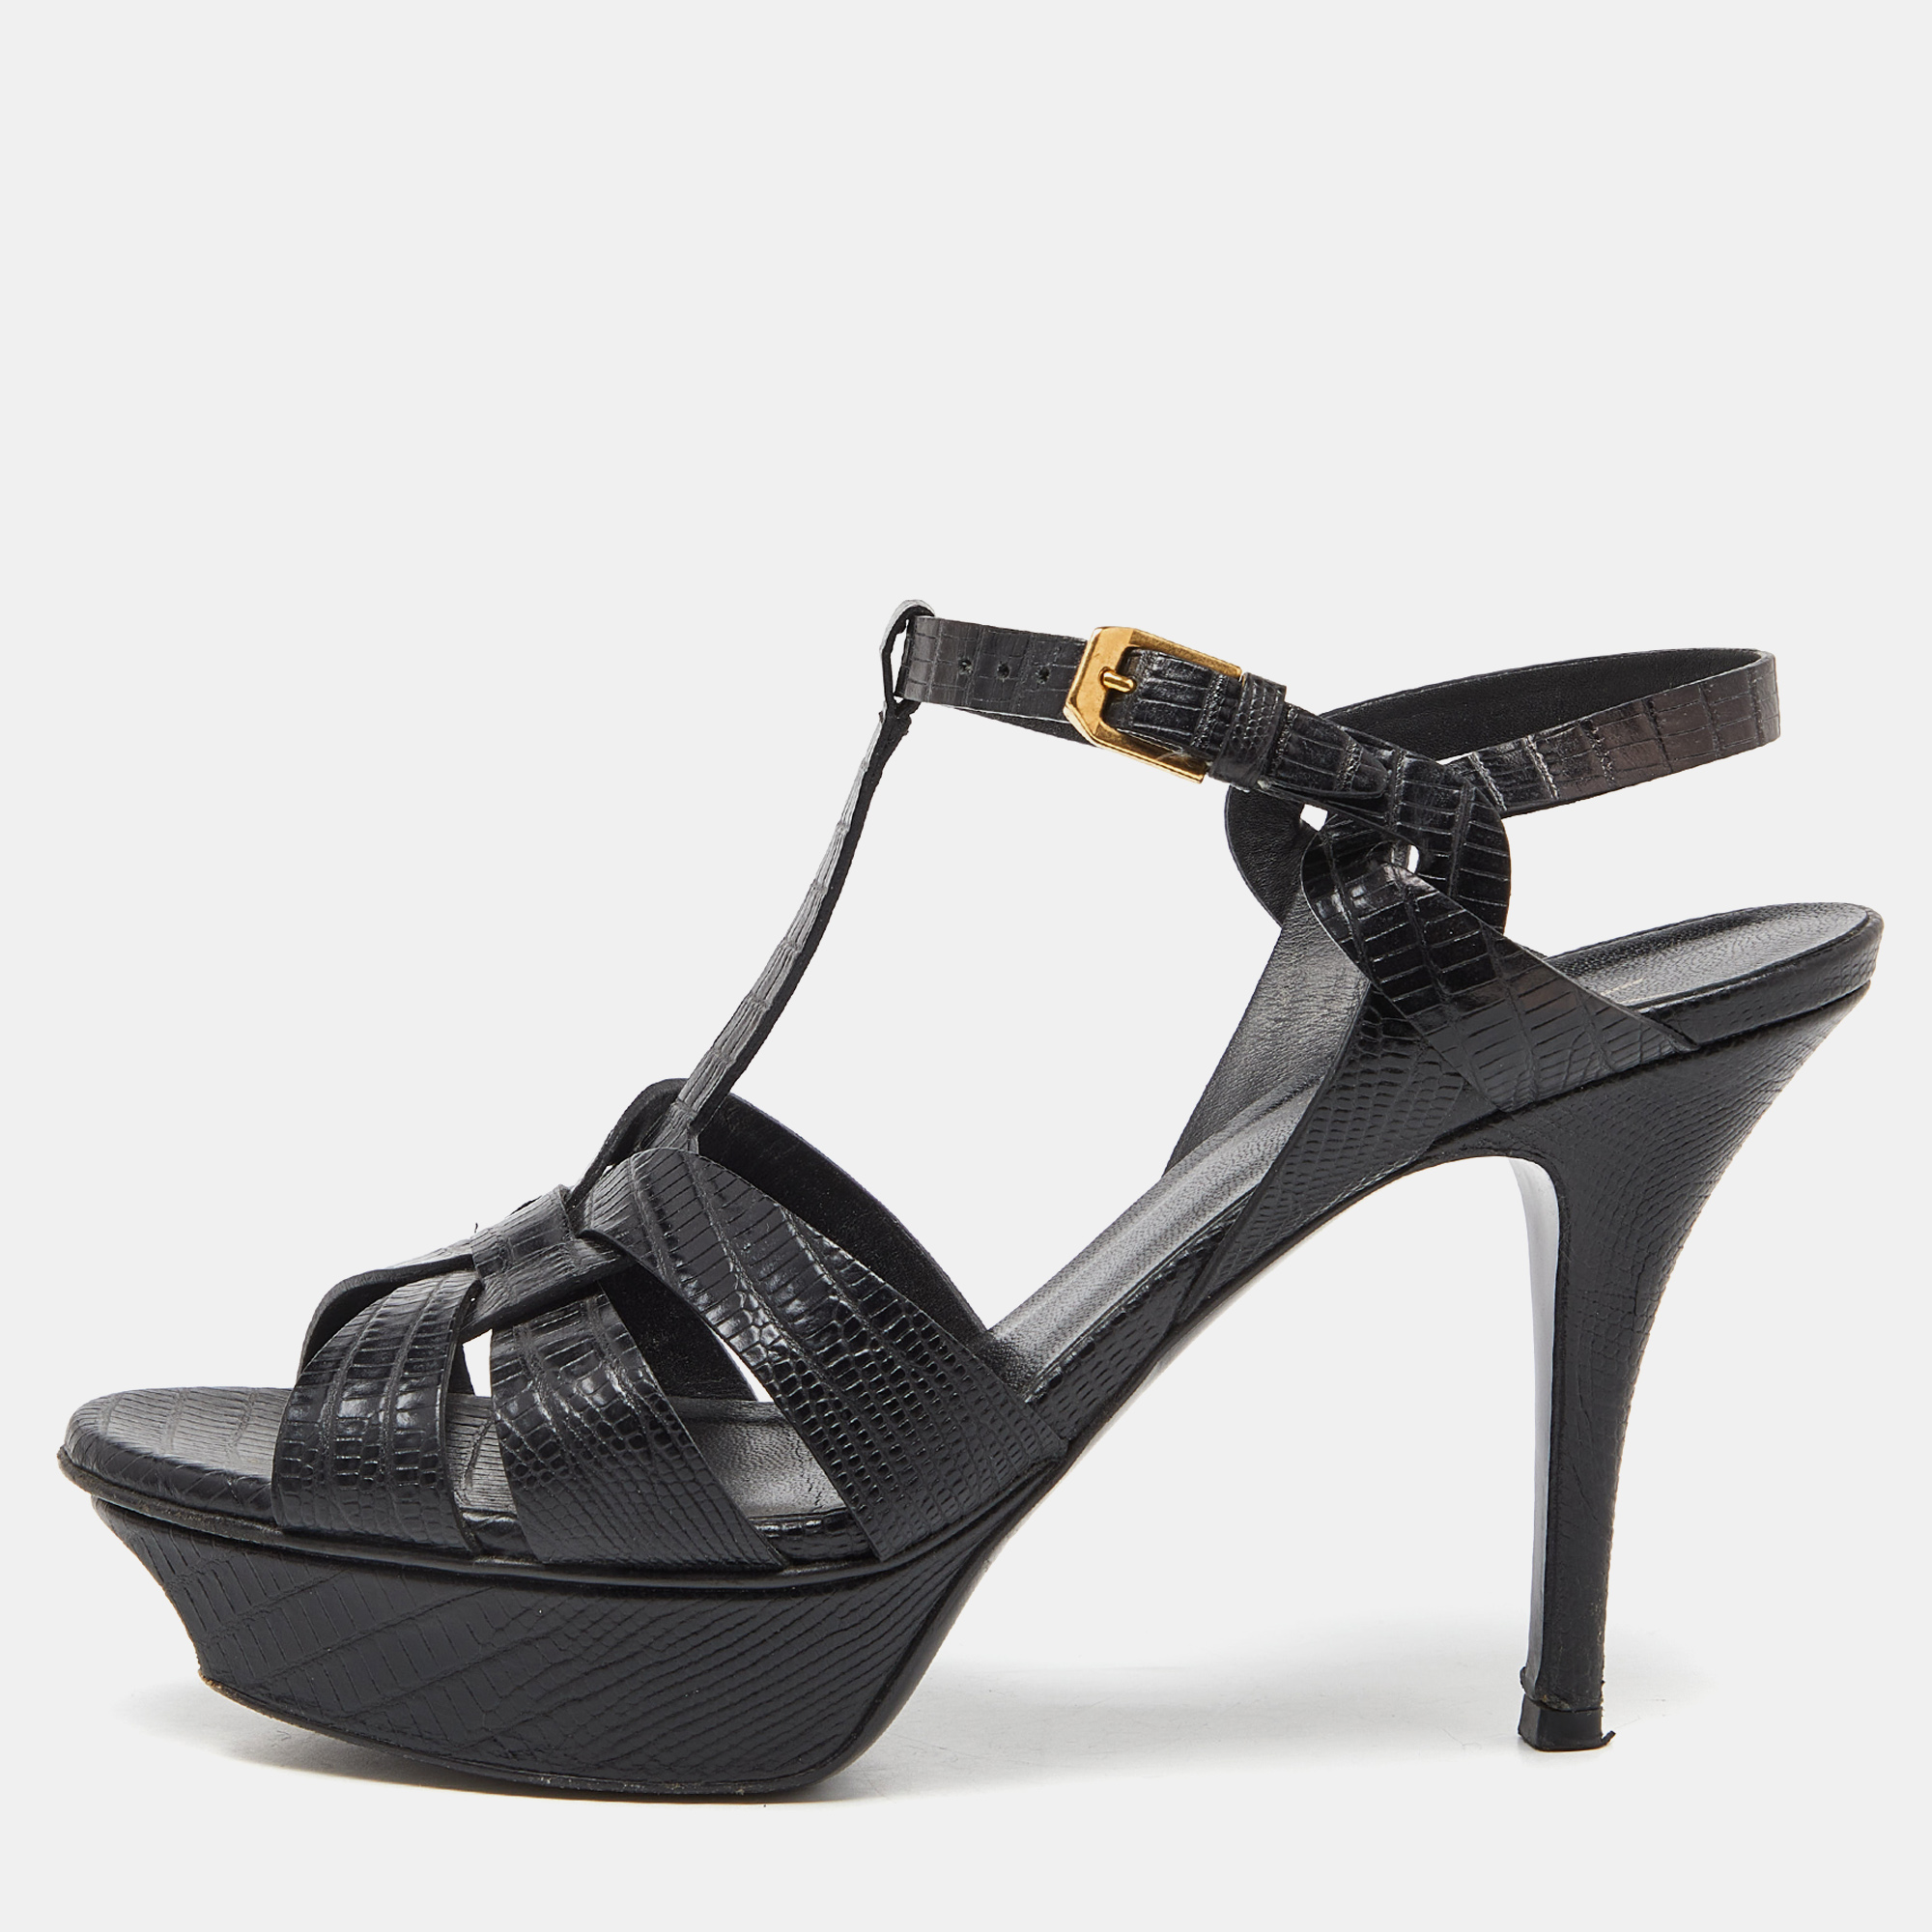 Pre-owned Saint Laurent Black Croc Embossed Leather Tribute Ankle Strap Sandals Size 37.5